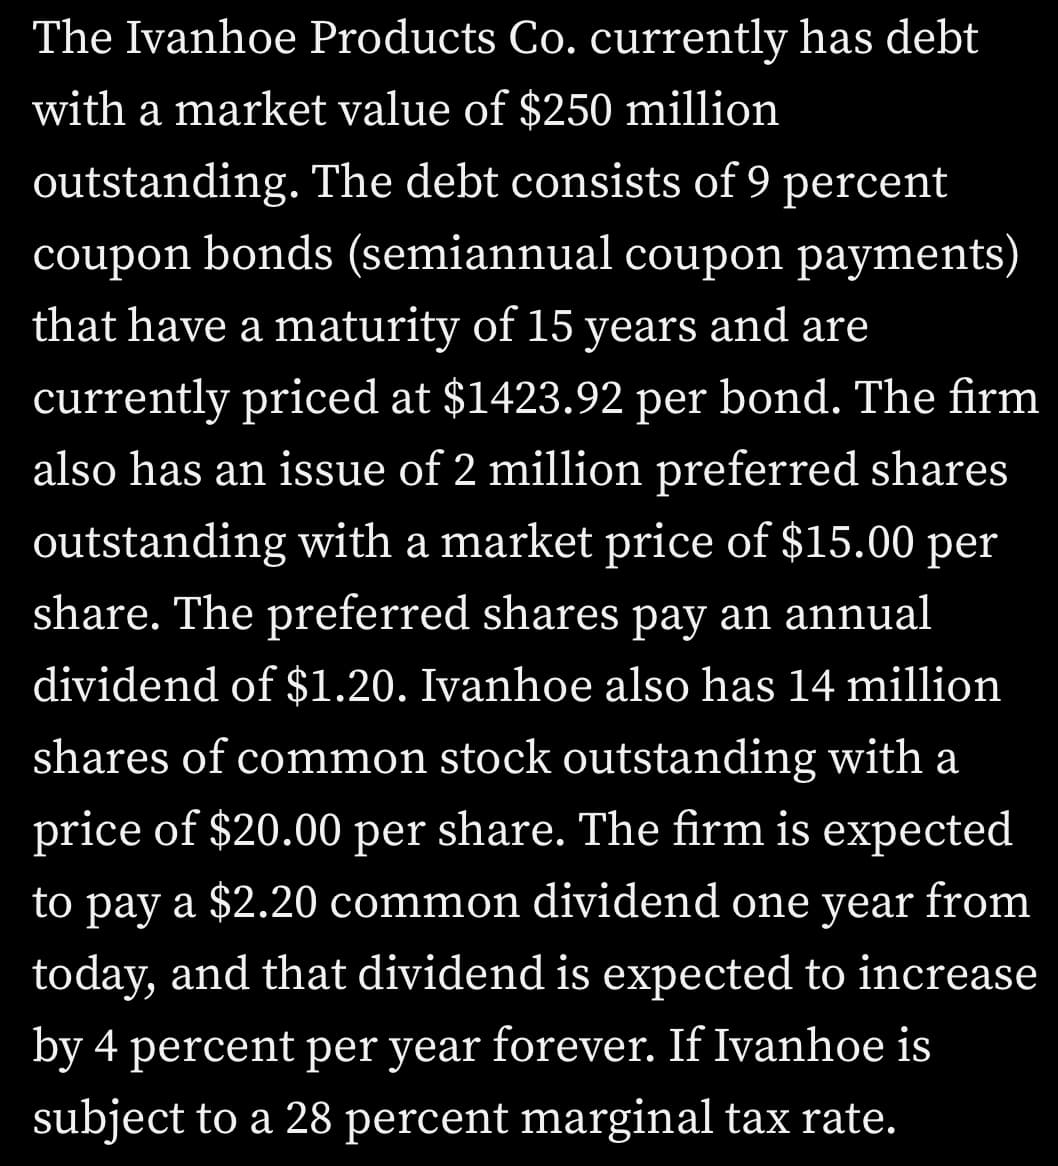 The Ivanhoe Products Co. currently has debt
with a market value of $250 million
outstanding. The debt consists of 9 percent
coupon bonds (semiannual coupon payments)
that have a maturity of 15 years and are
currently priced at $1423.92 per bond. The firm
also has an issue of 2 million preferred shares
outstanding with a market price of $15.00 per
share. The preferred shares pay an annual
dividend of $1.20. Ivanhoe also has 14 million
shares of common stock outstanding with a
price of $20.00 per share. The firm is expected
to pay a $2.20 common dividend one year from
today, and that dividend is expected to increase
by 4 percent per year forever. If Ivanhoe is
subject to a 28 percent marginal tax rate.